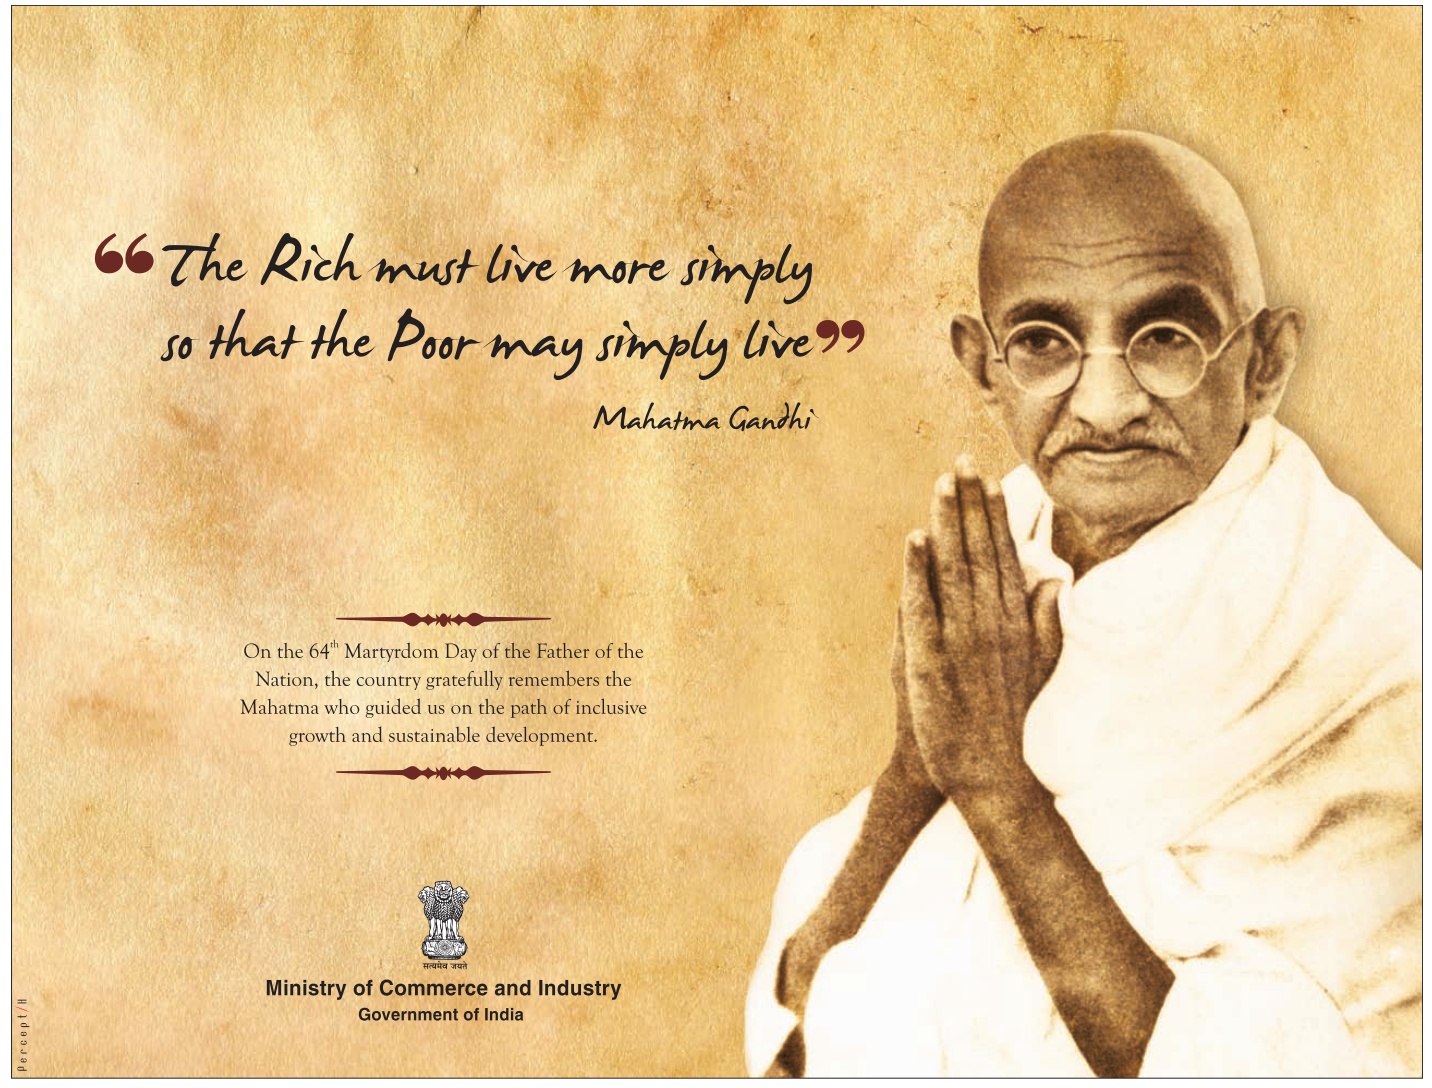 pigmediacraft: #quote Mahatma Gandhi- The rich must live more simply